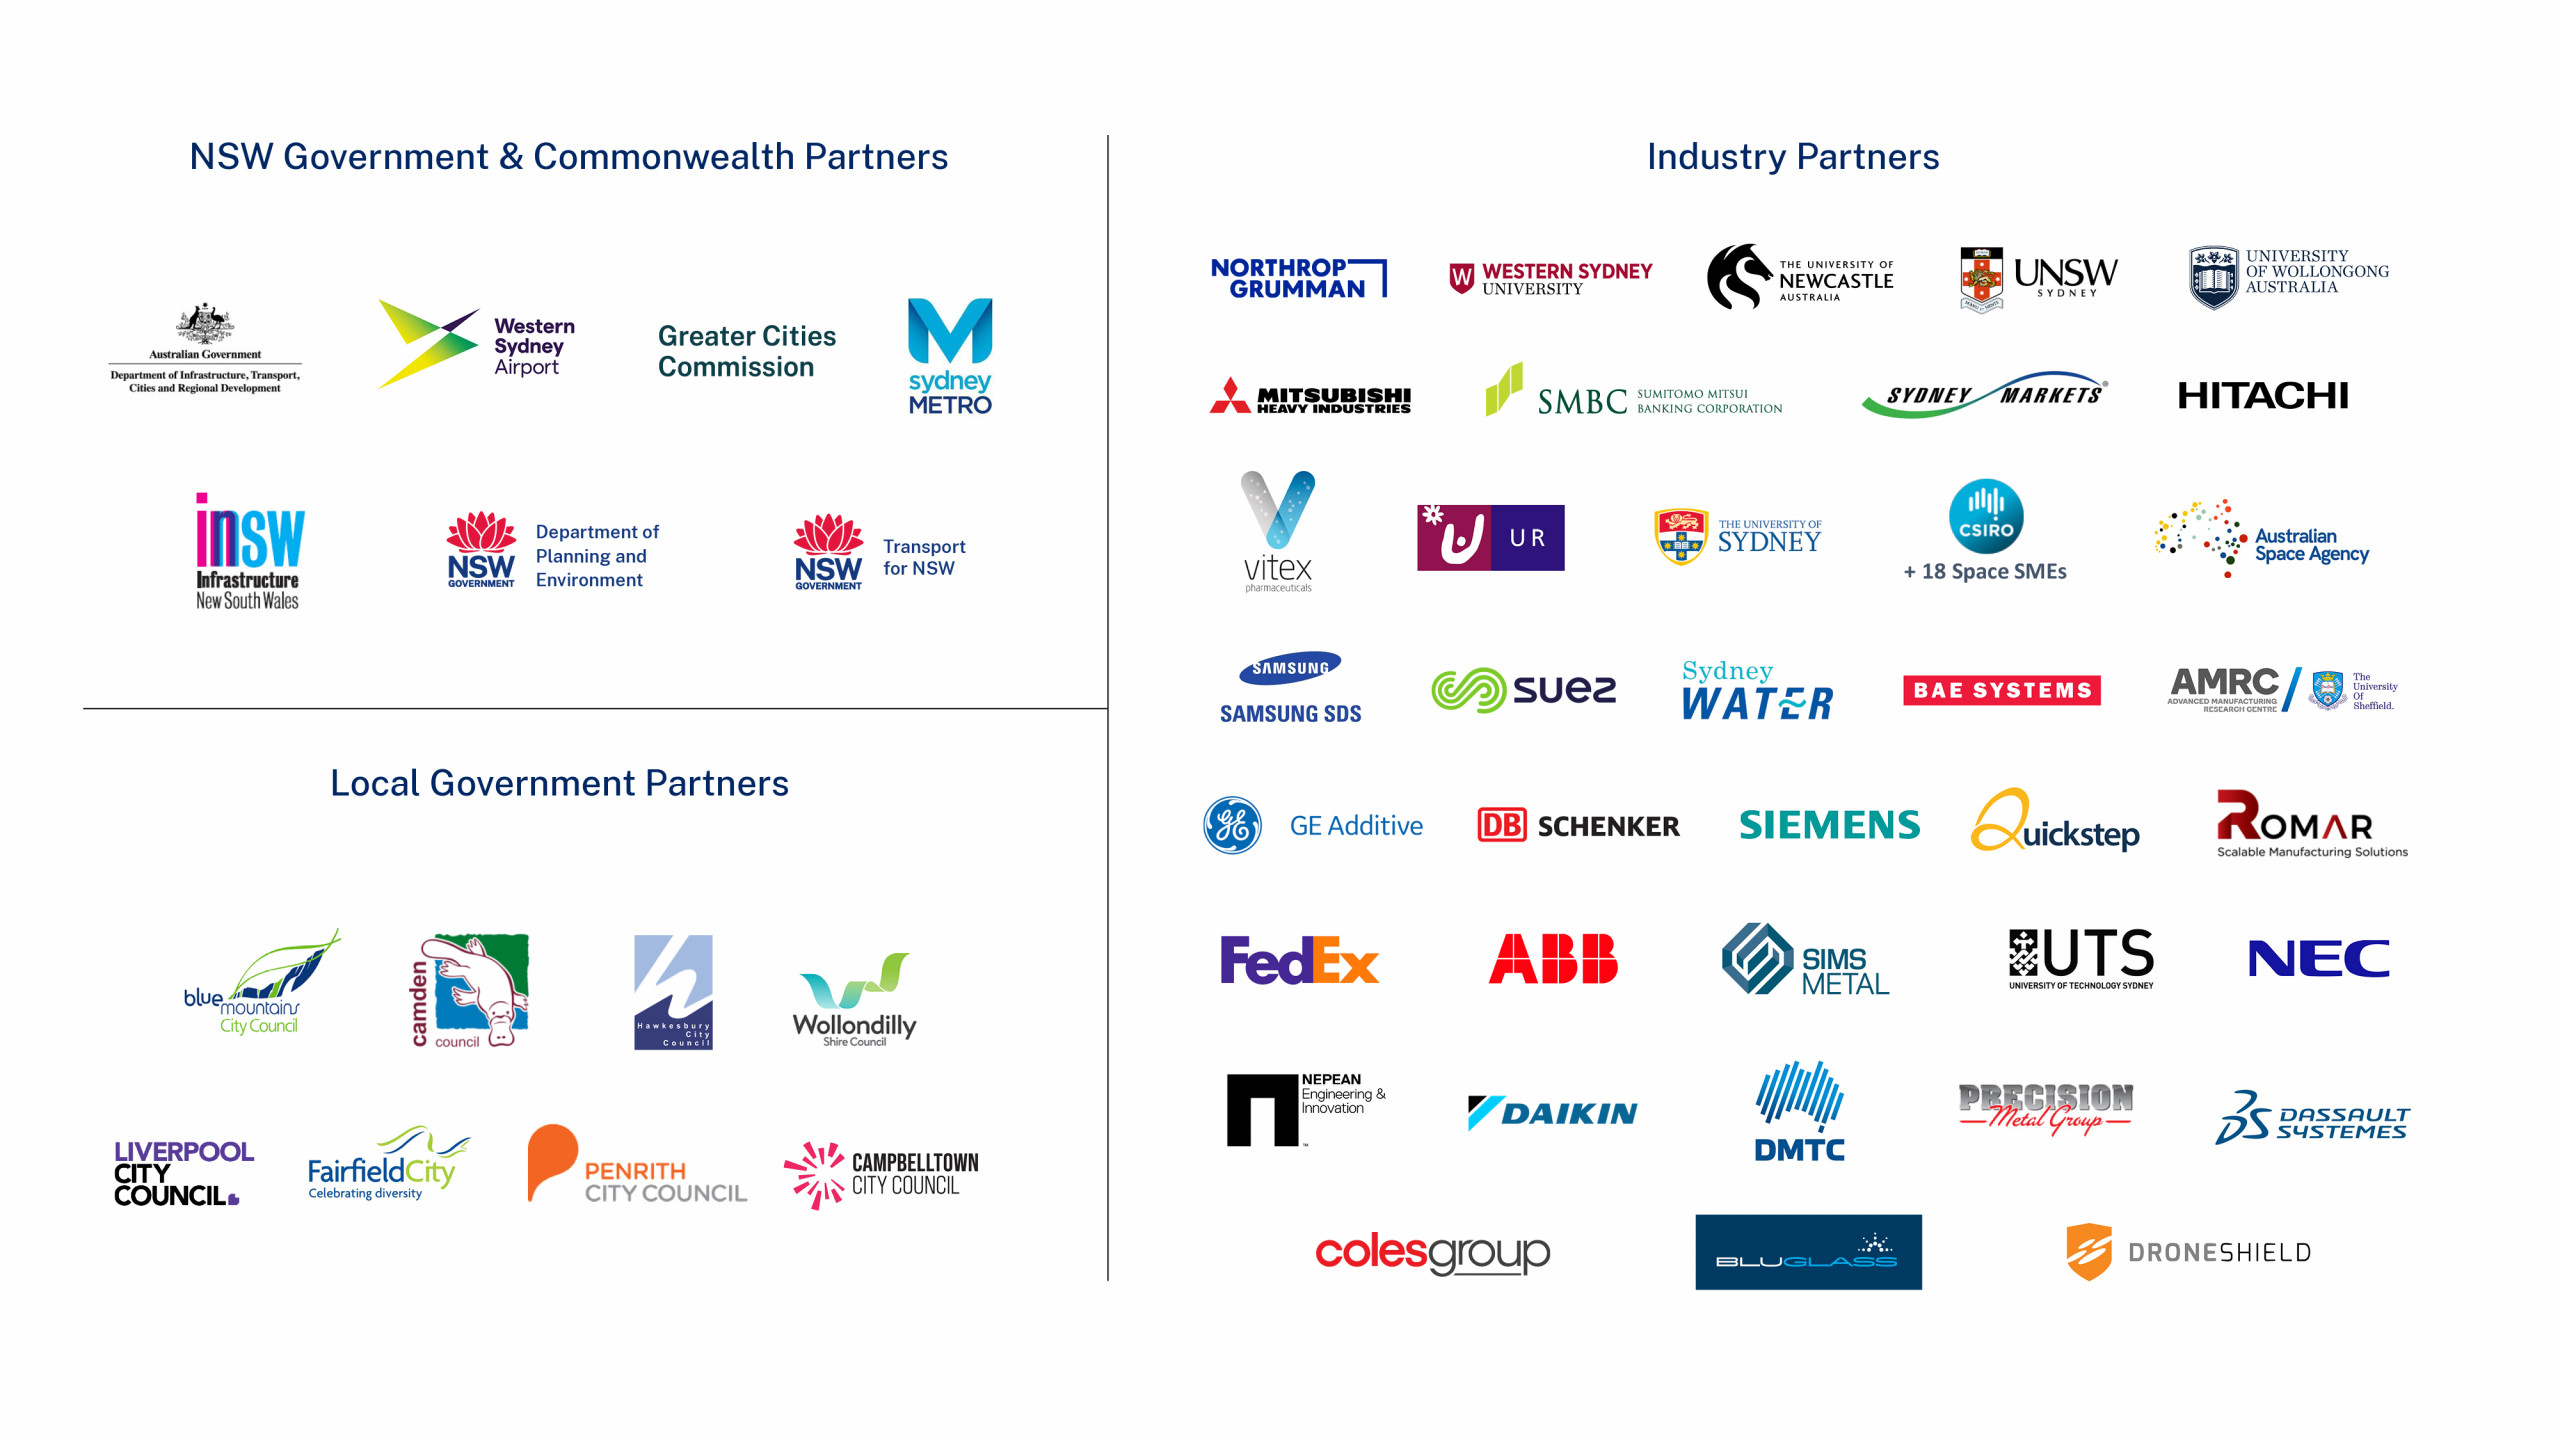 WPCA IndustryPartners 22July